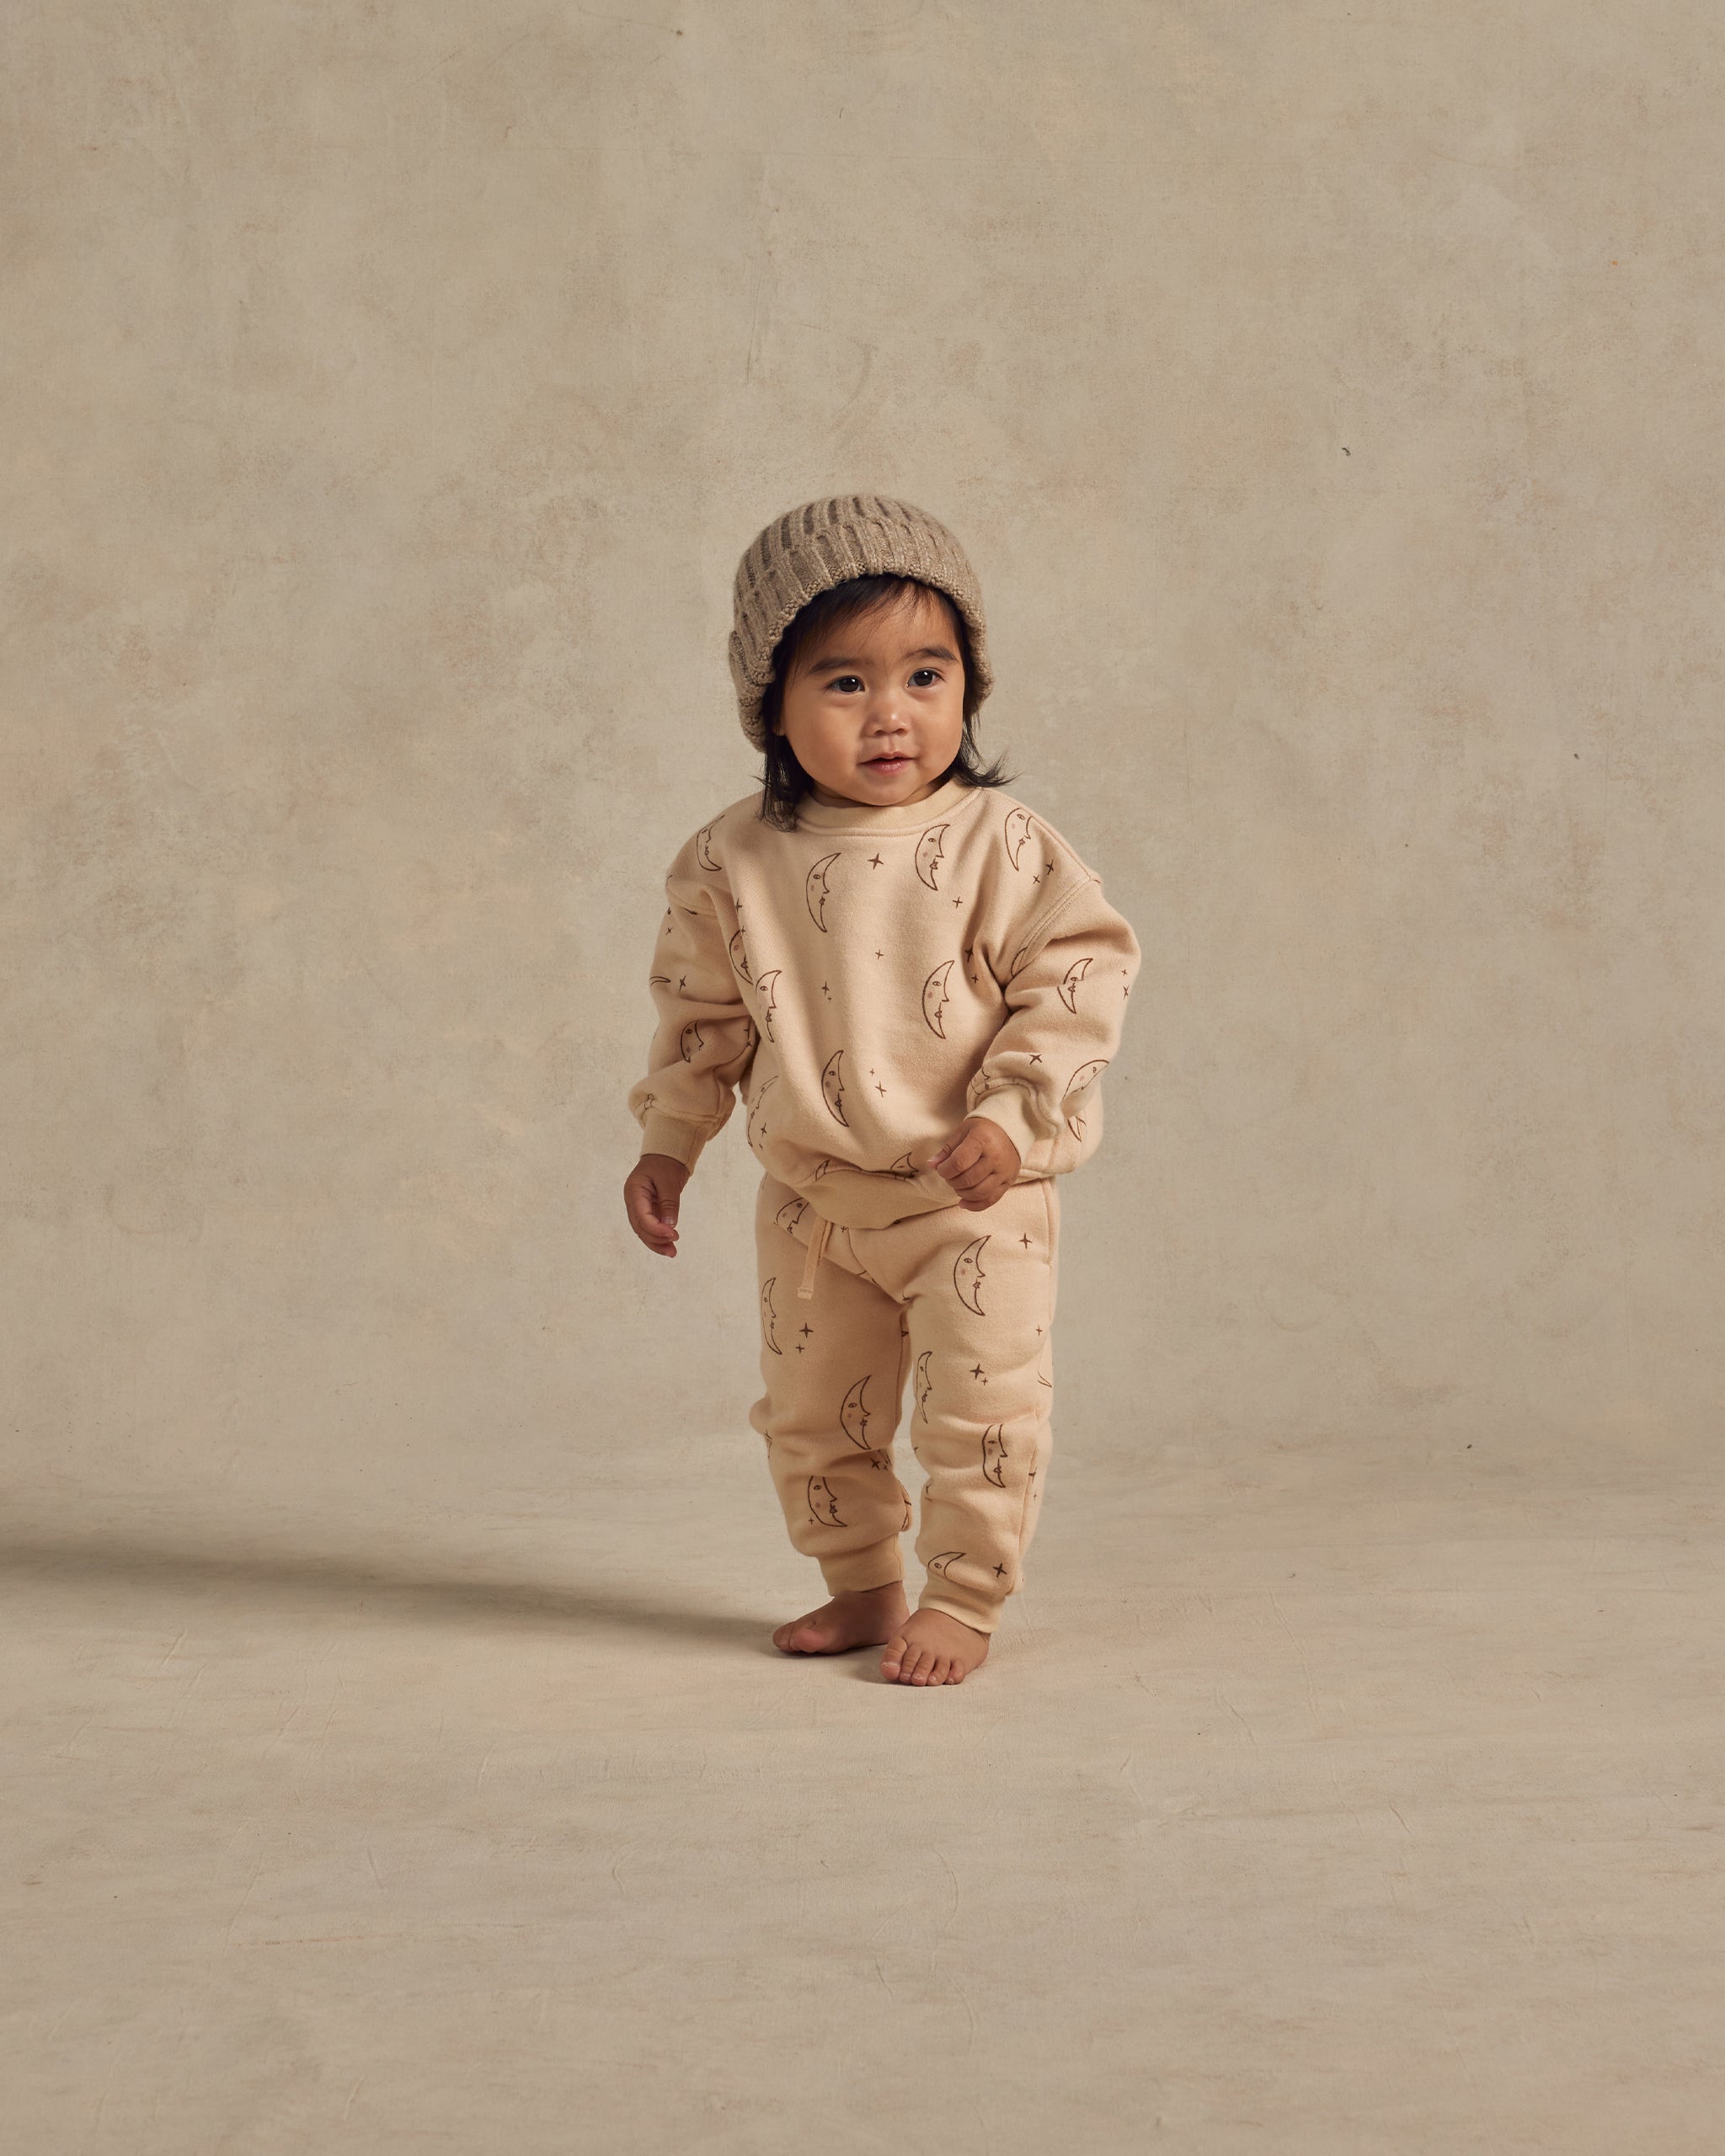 Relaxed Sweatshirt || Moons - Rylee + Cru | Kids Clothes | Trendy Baby Clothes | Modern Infant Outfits |